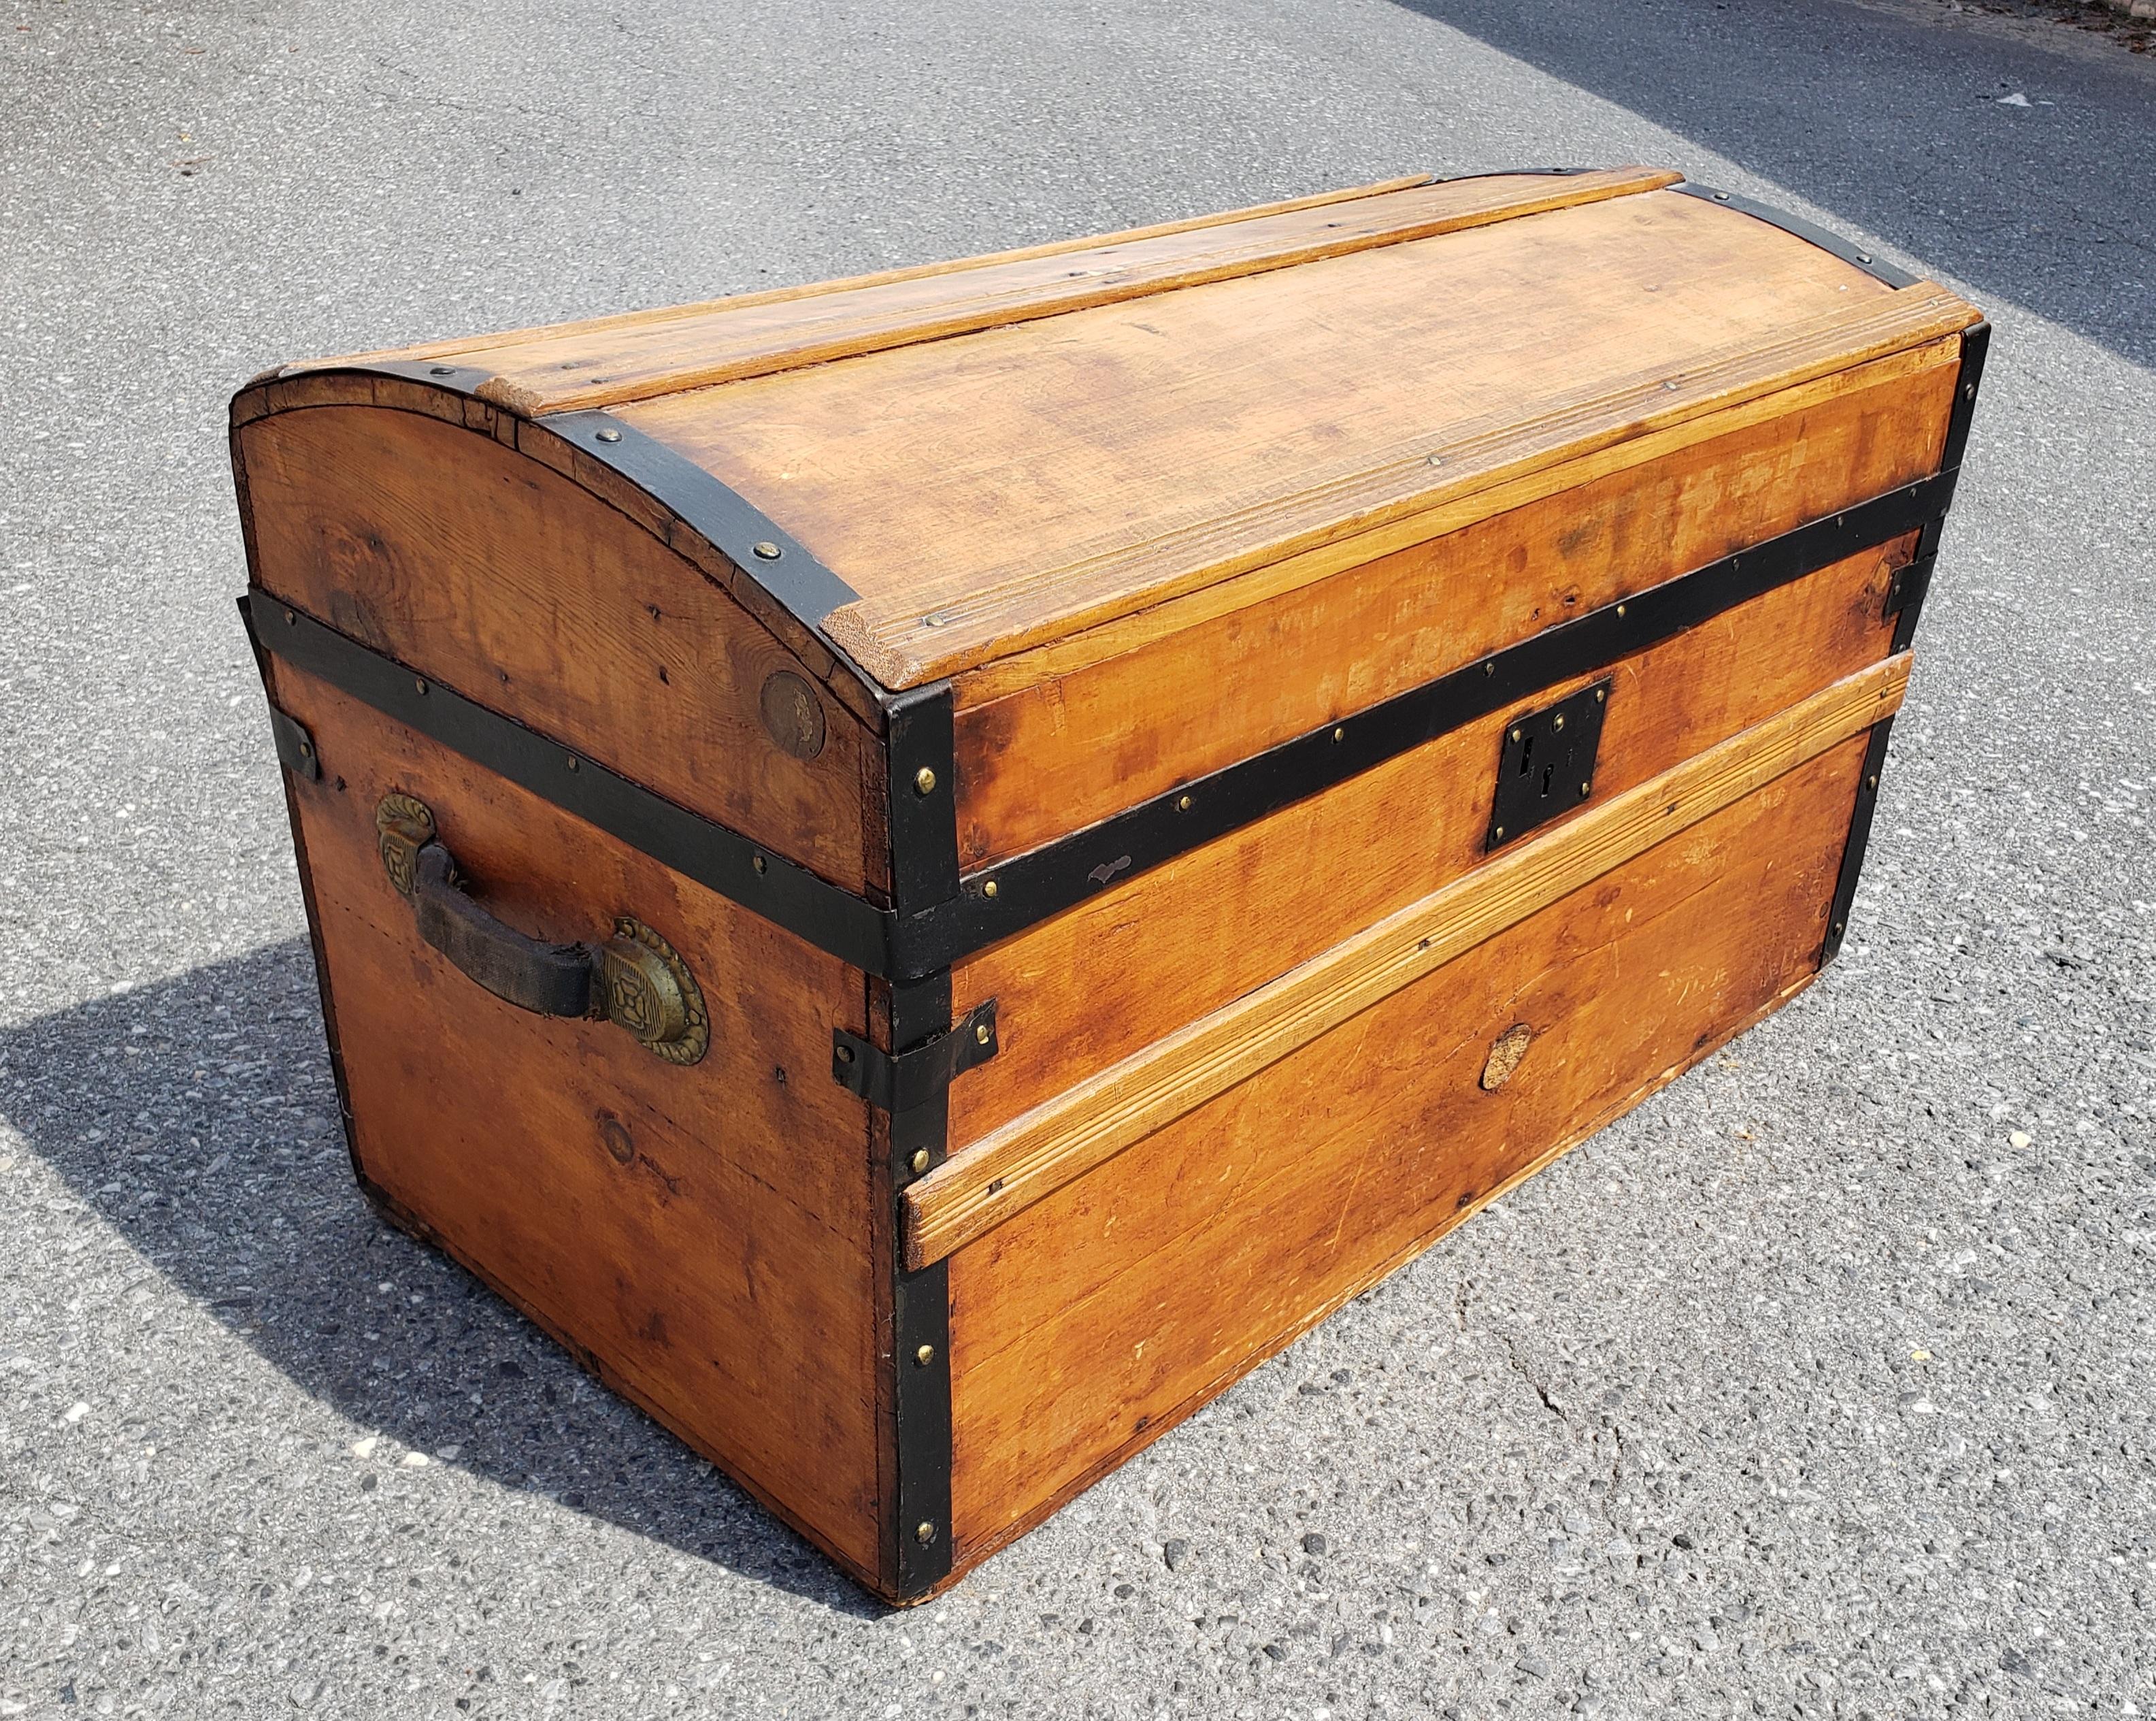 Early 20th Century American Rolling pine Blanket Trunk. Measures 30